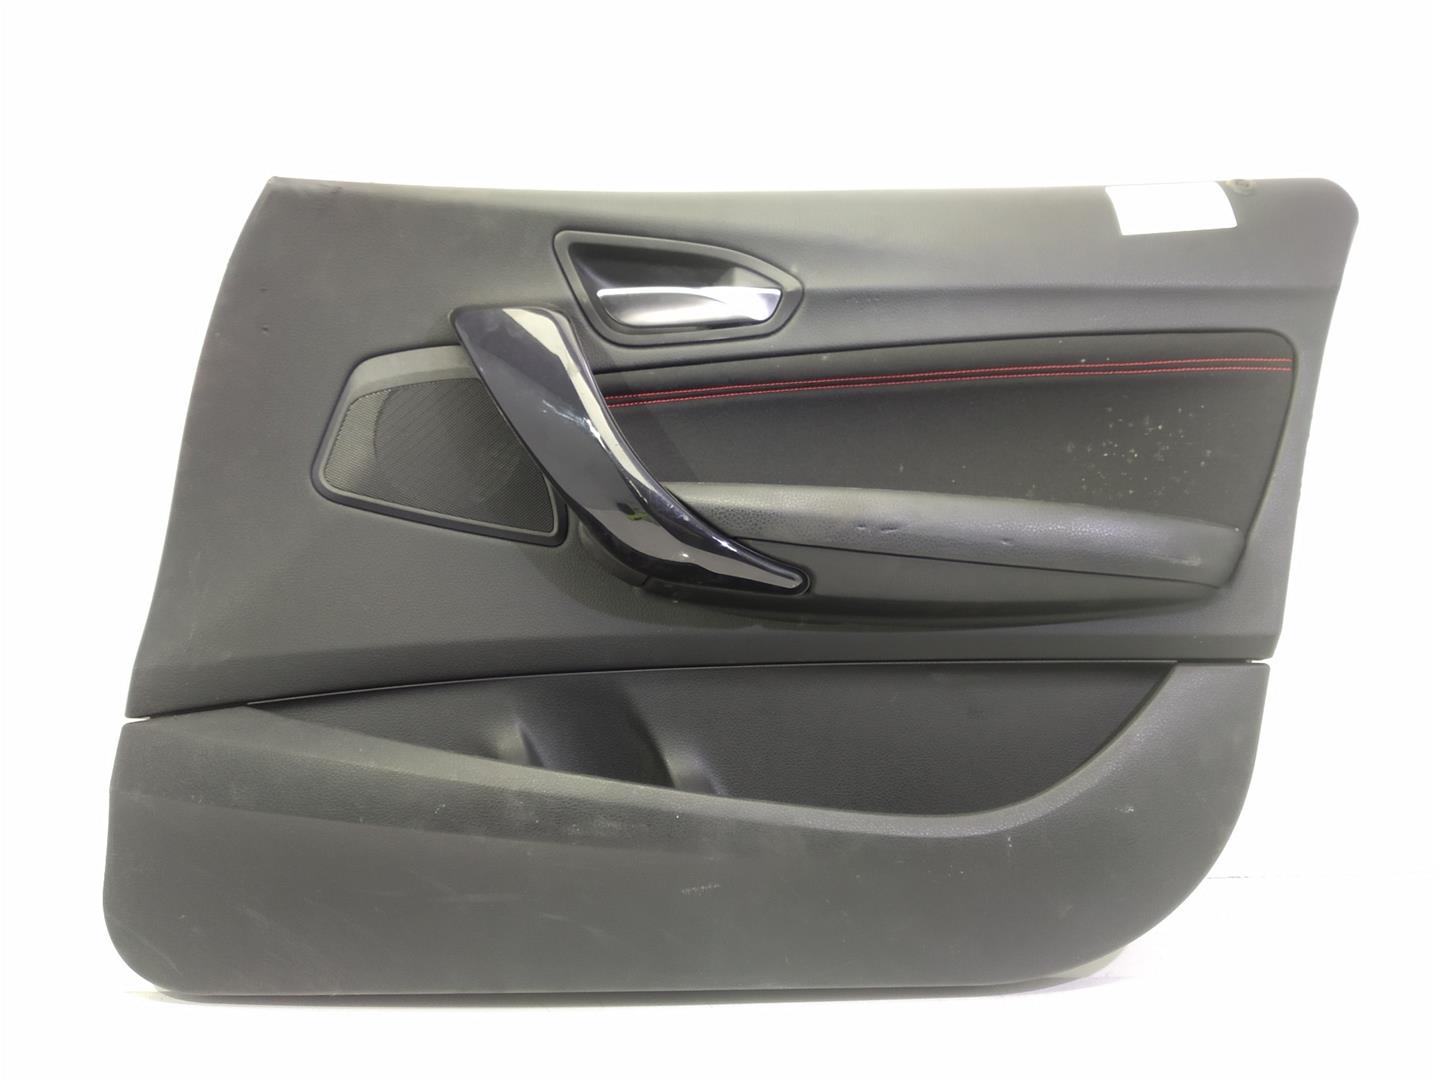 BMW 1 Series F20/F21 (2011-2020) Front Right Door Panel R51417240404, R51417240404, R51417240404 24514978